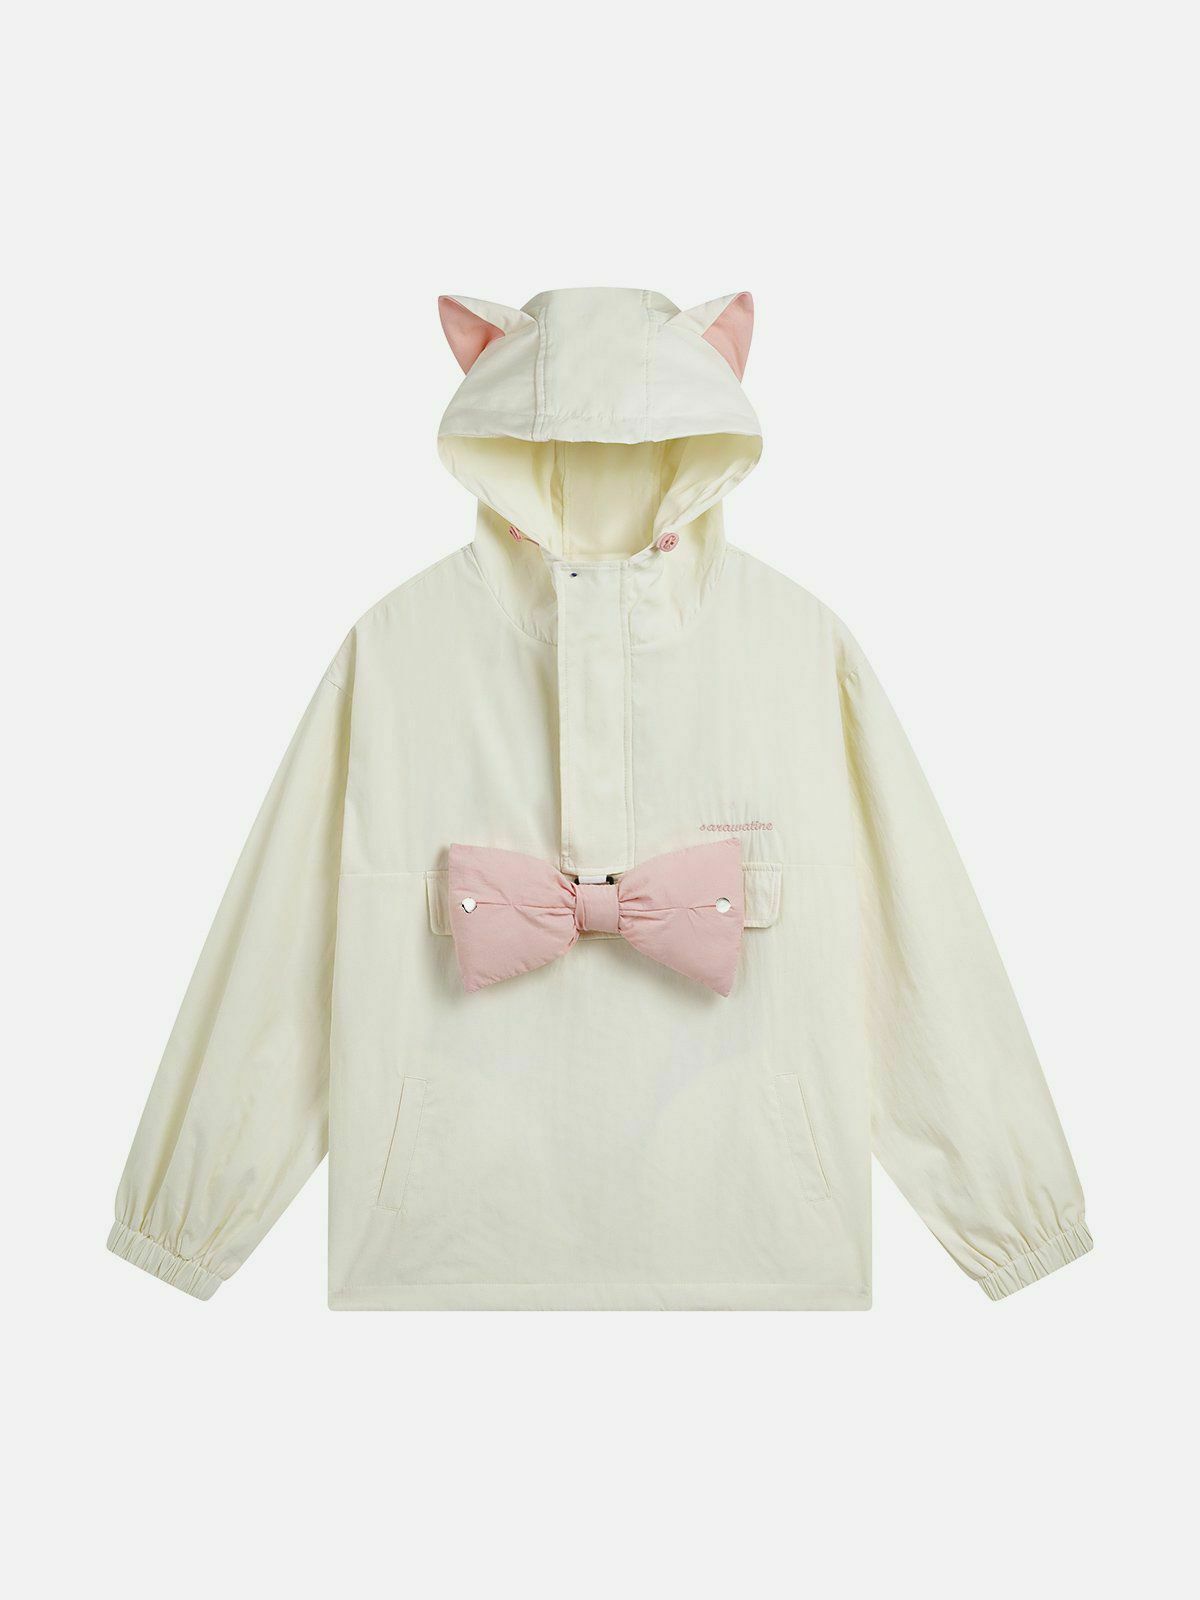 chic cat ear hoodie with bow tie   youthful urban appeal 6551